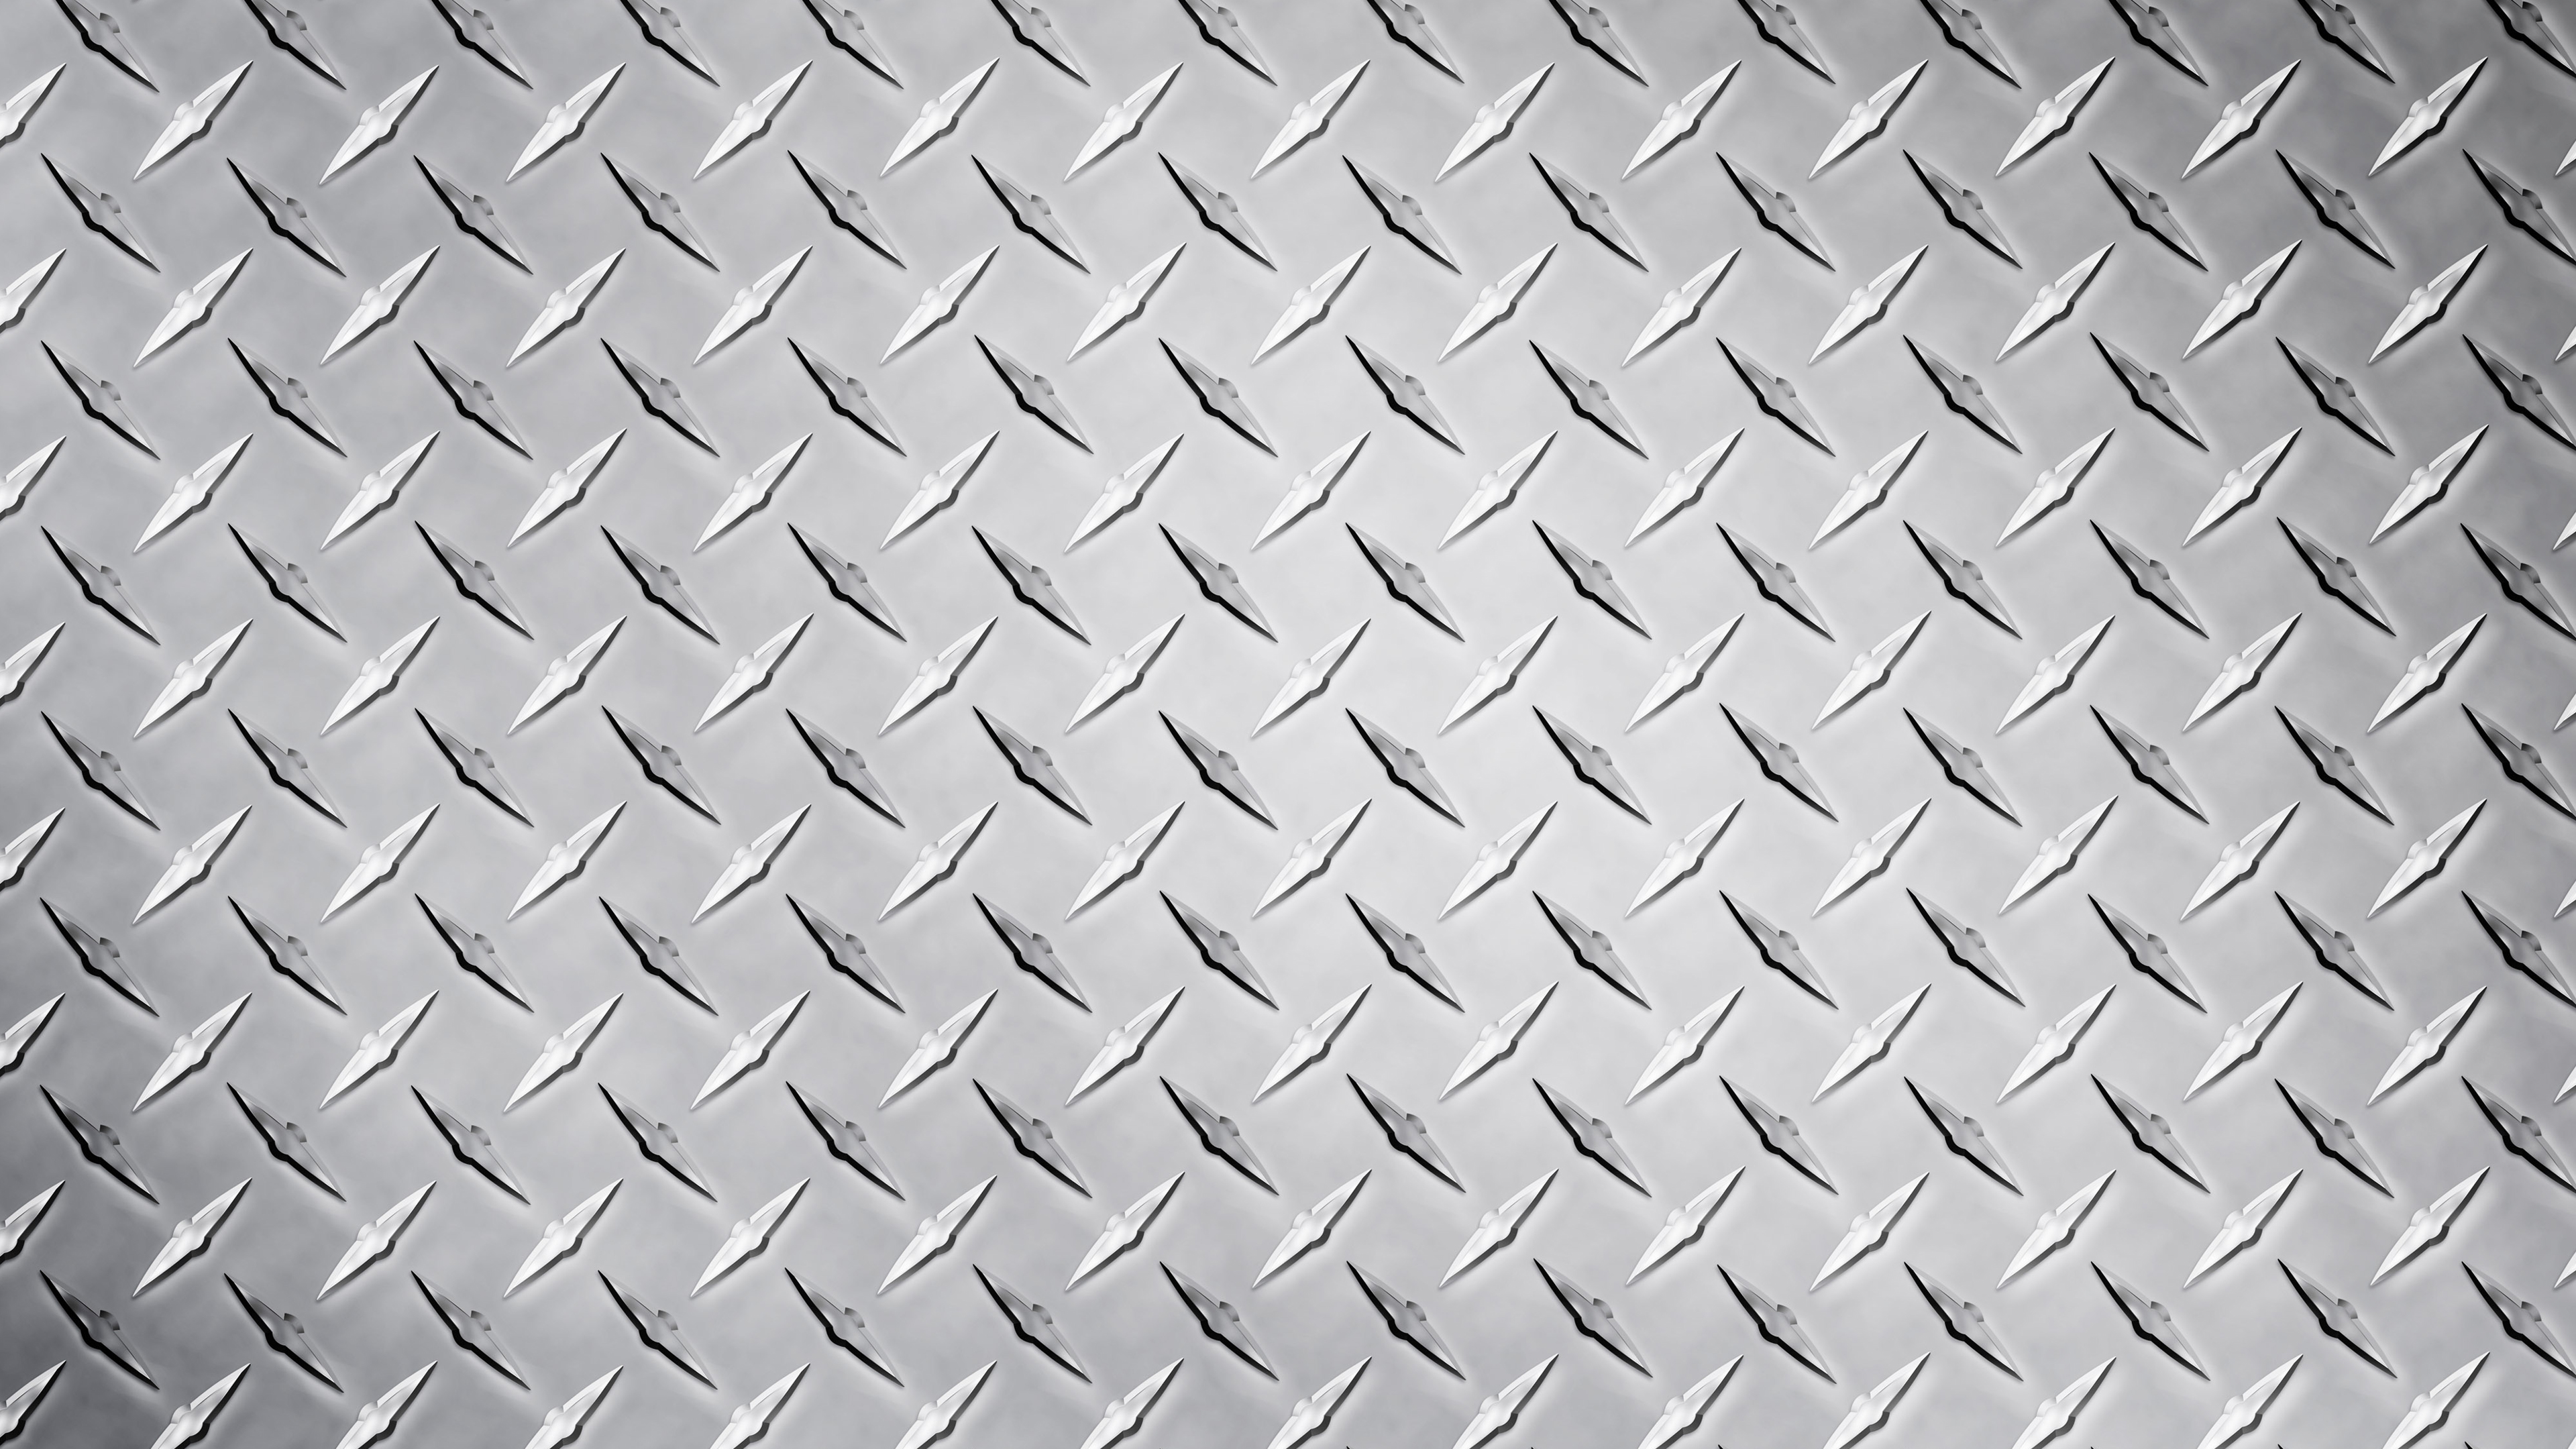 General 3840x2160 abstract diamond plate pattern metal steel texture shiny